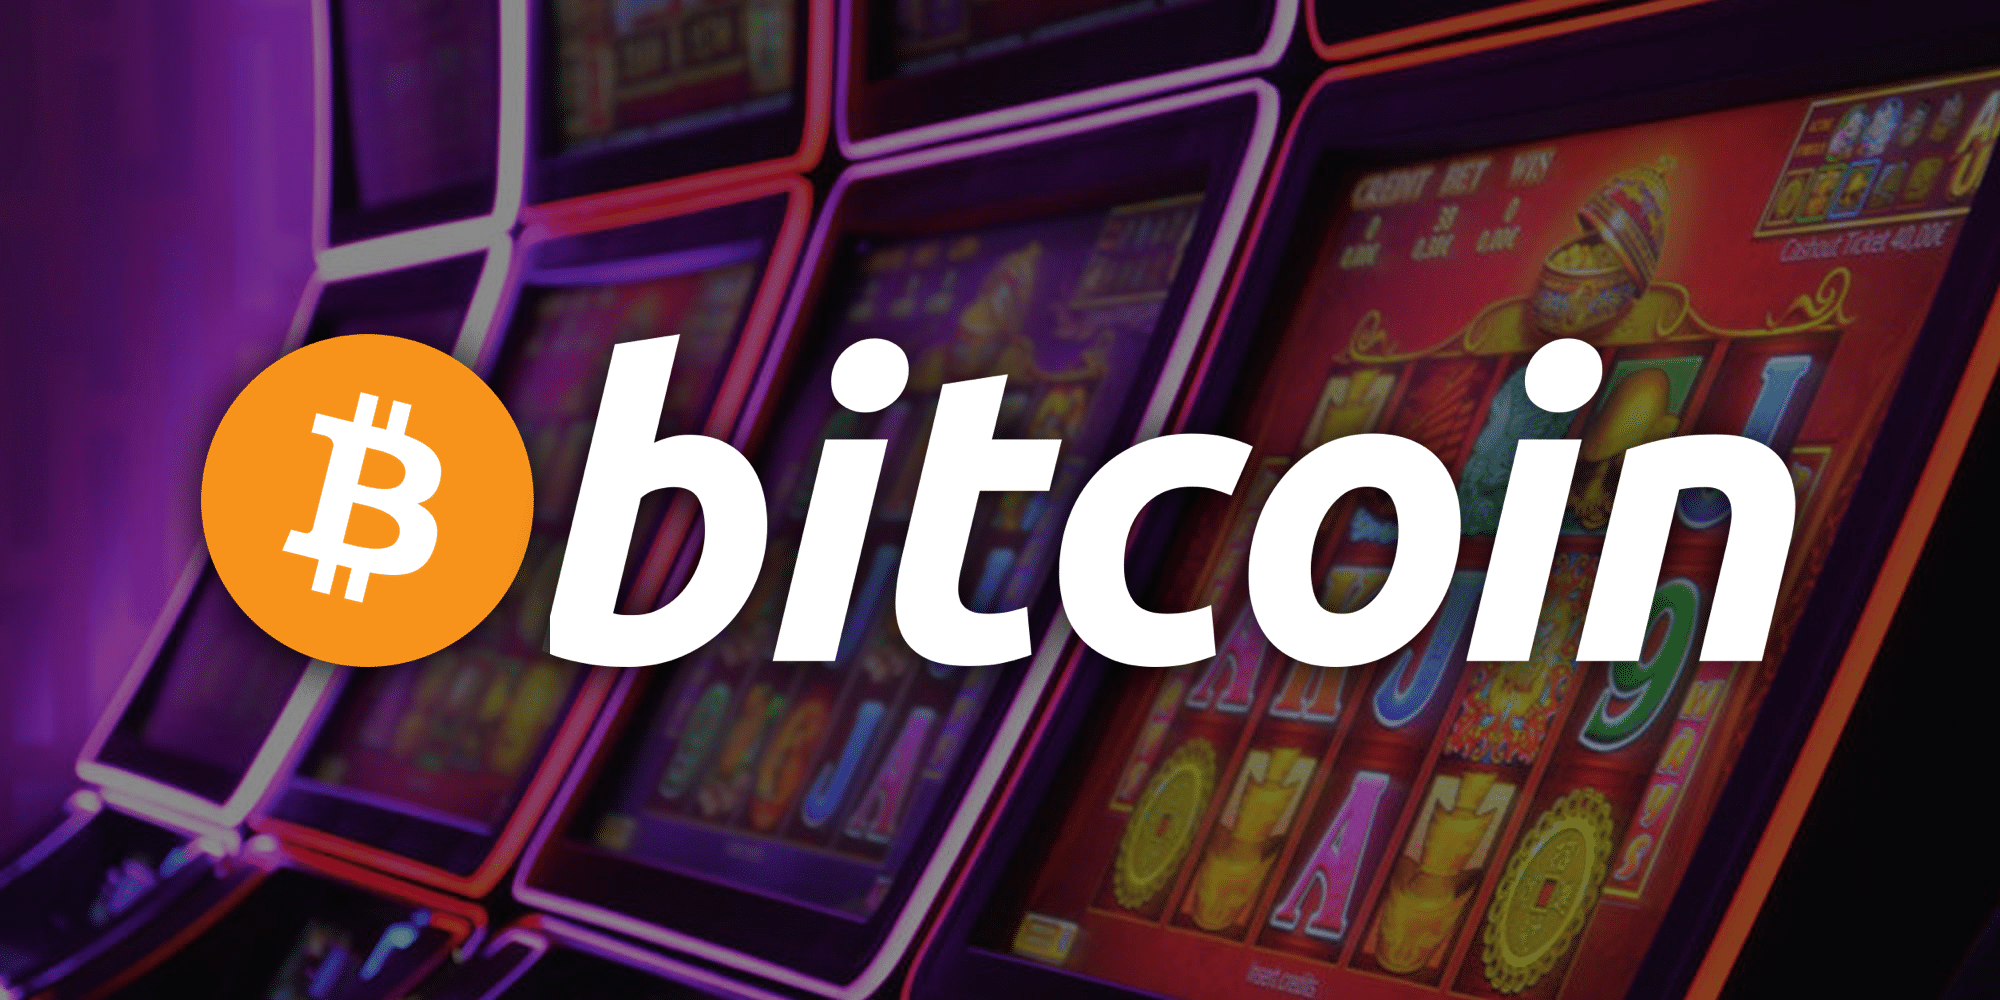 How To Deal With Very Bad best bitcoin casino sites